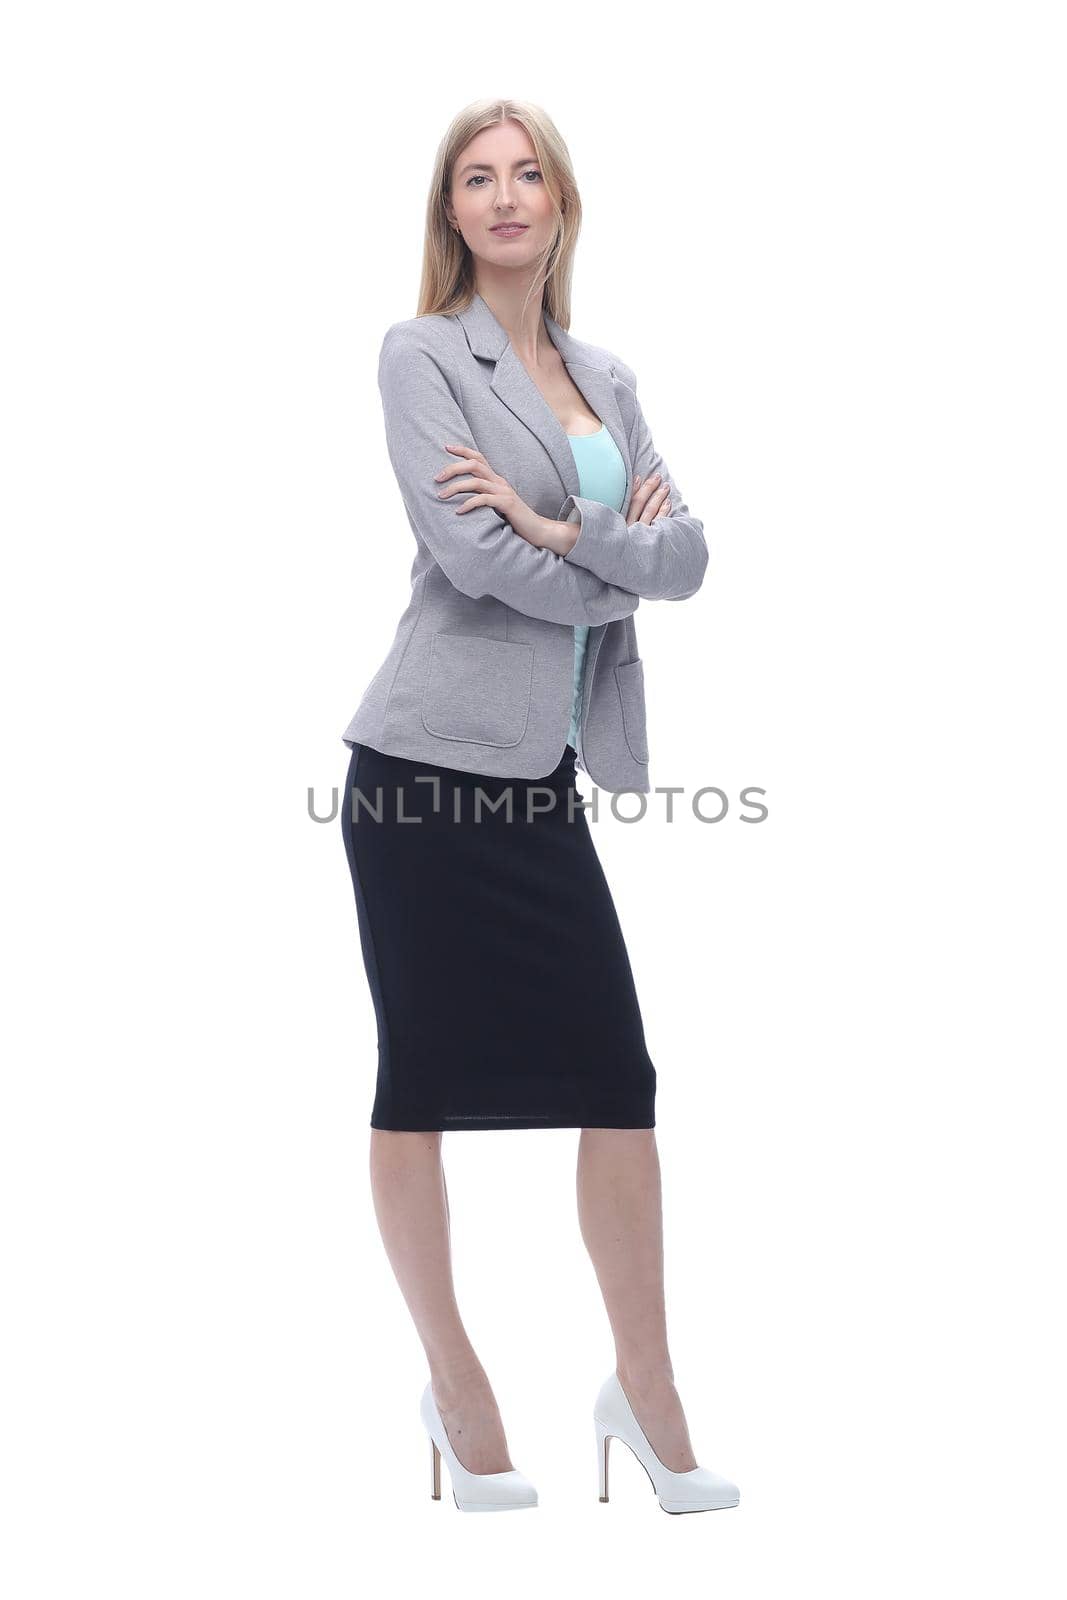 in full growth. confident business woman. isolated on grey background